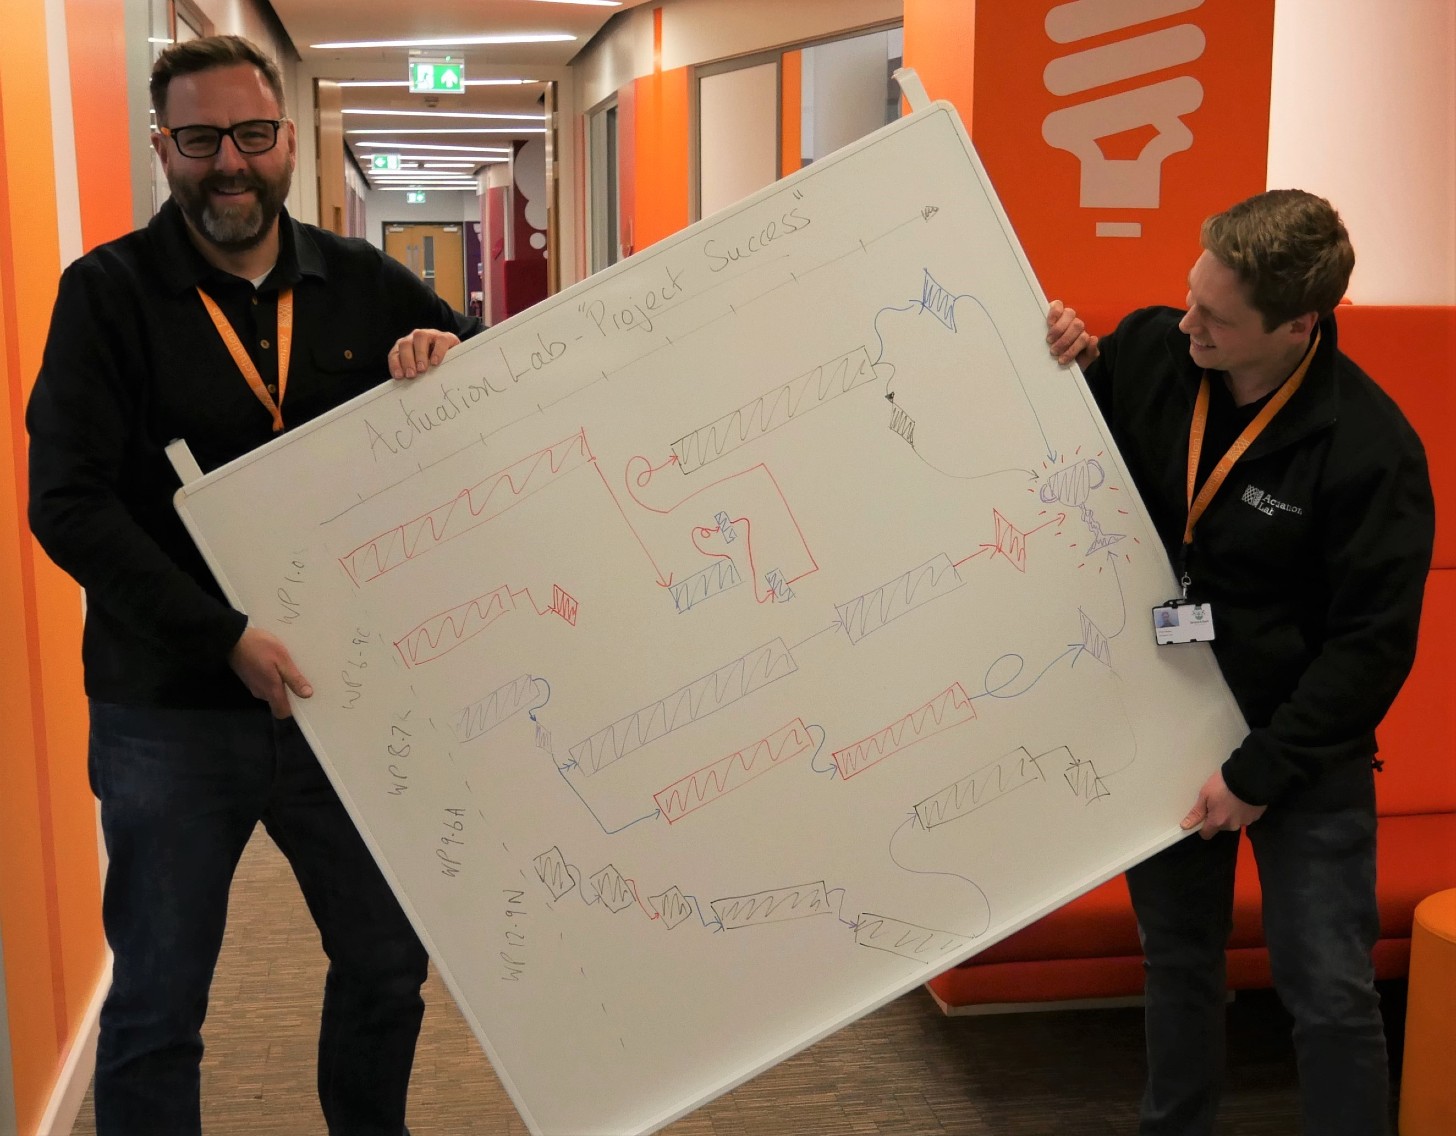 CEO Simon Bates hands over to Mike a white board on which a Gantt chart, titled "Actuation Lab 'Project Success'", has been drawn.